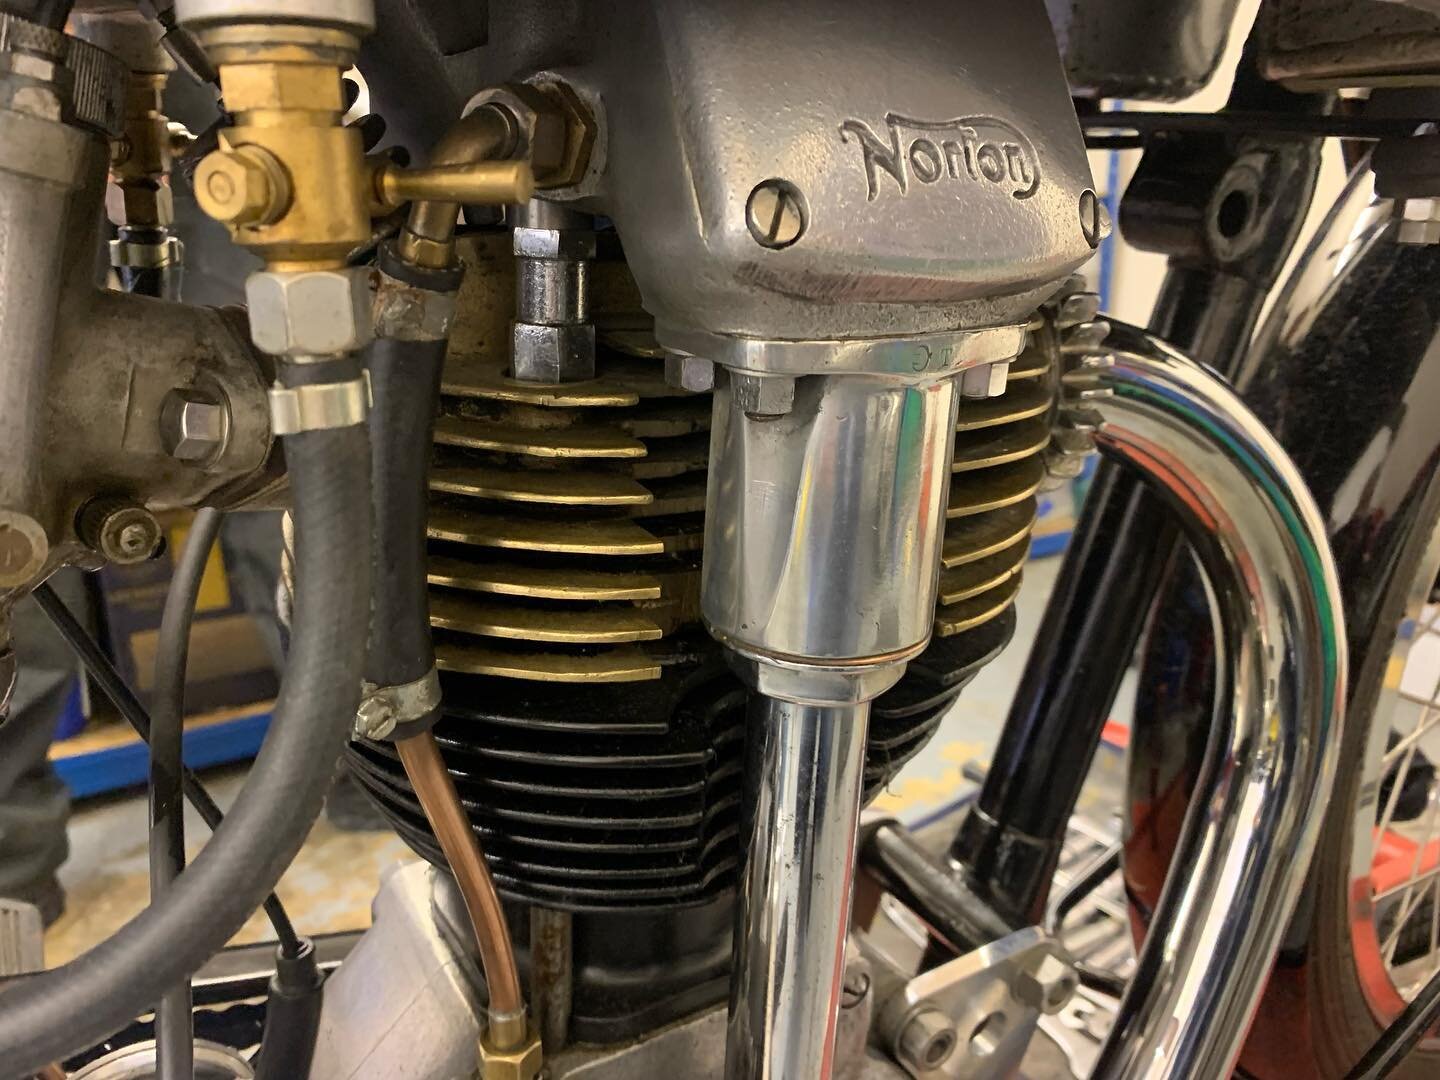 1933 Norton International bronze head.  To be seen on one of our runs soon! 
#vmcc #girderfork #nortonmotorcycles #northcotswolds